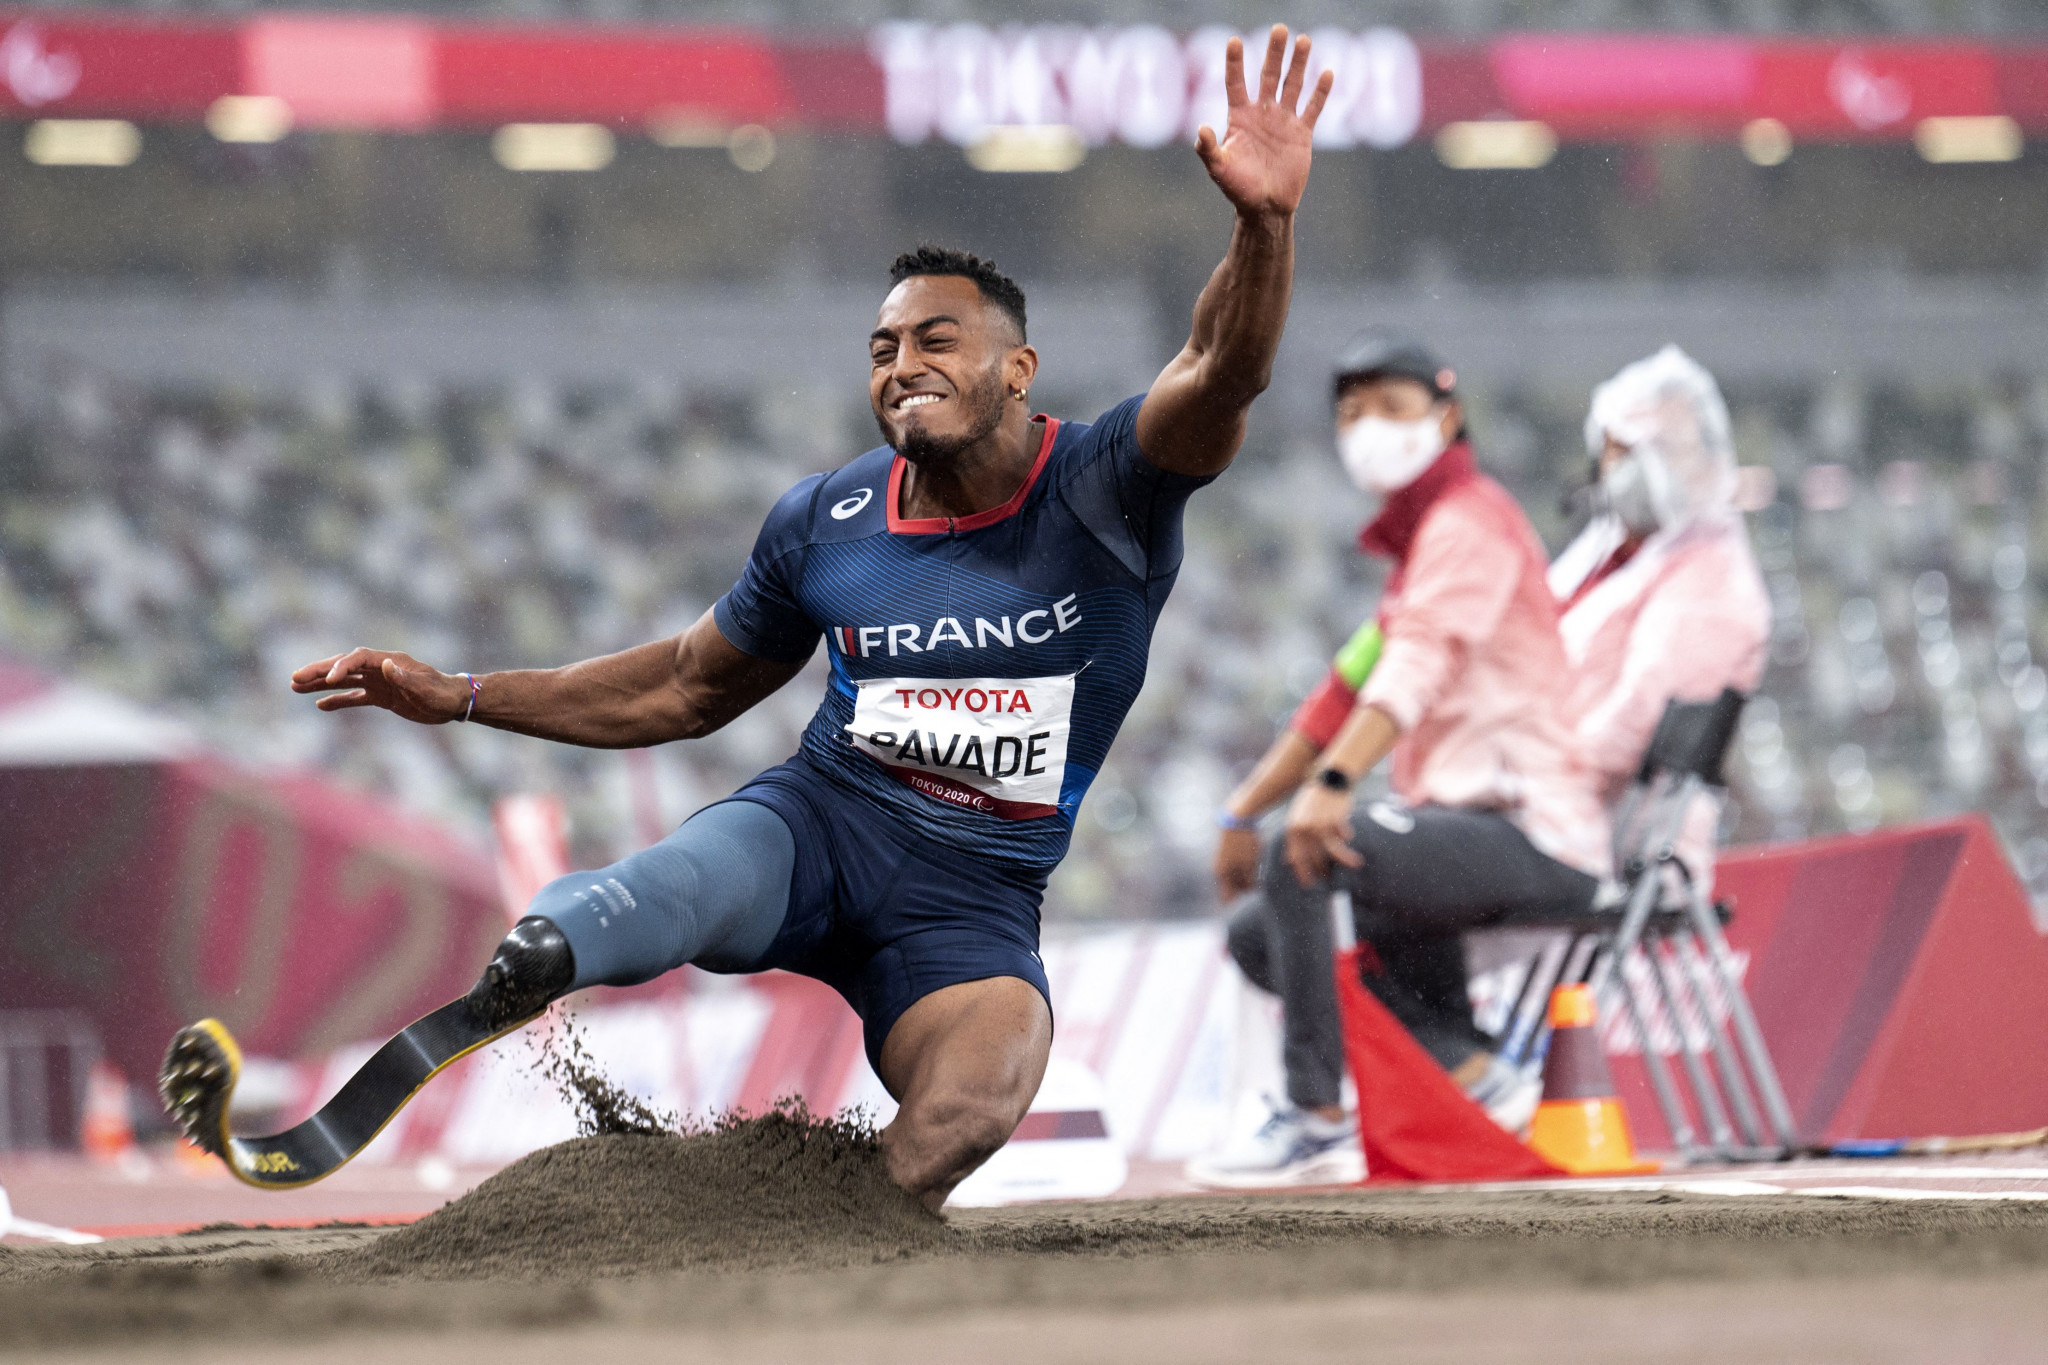 Paris to host 2023 World Para Athletics Championships in build-up to Paralympics